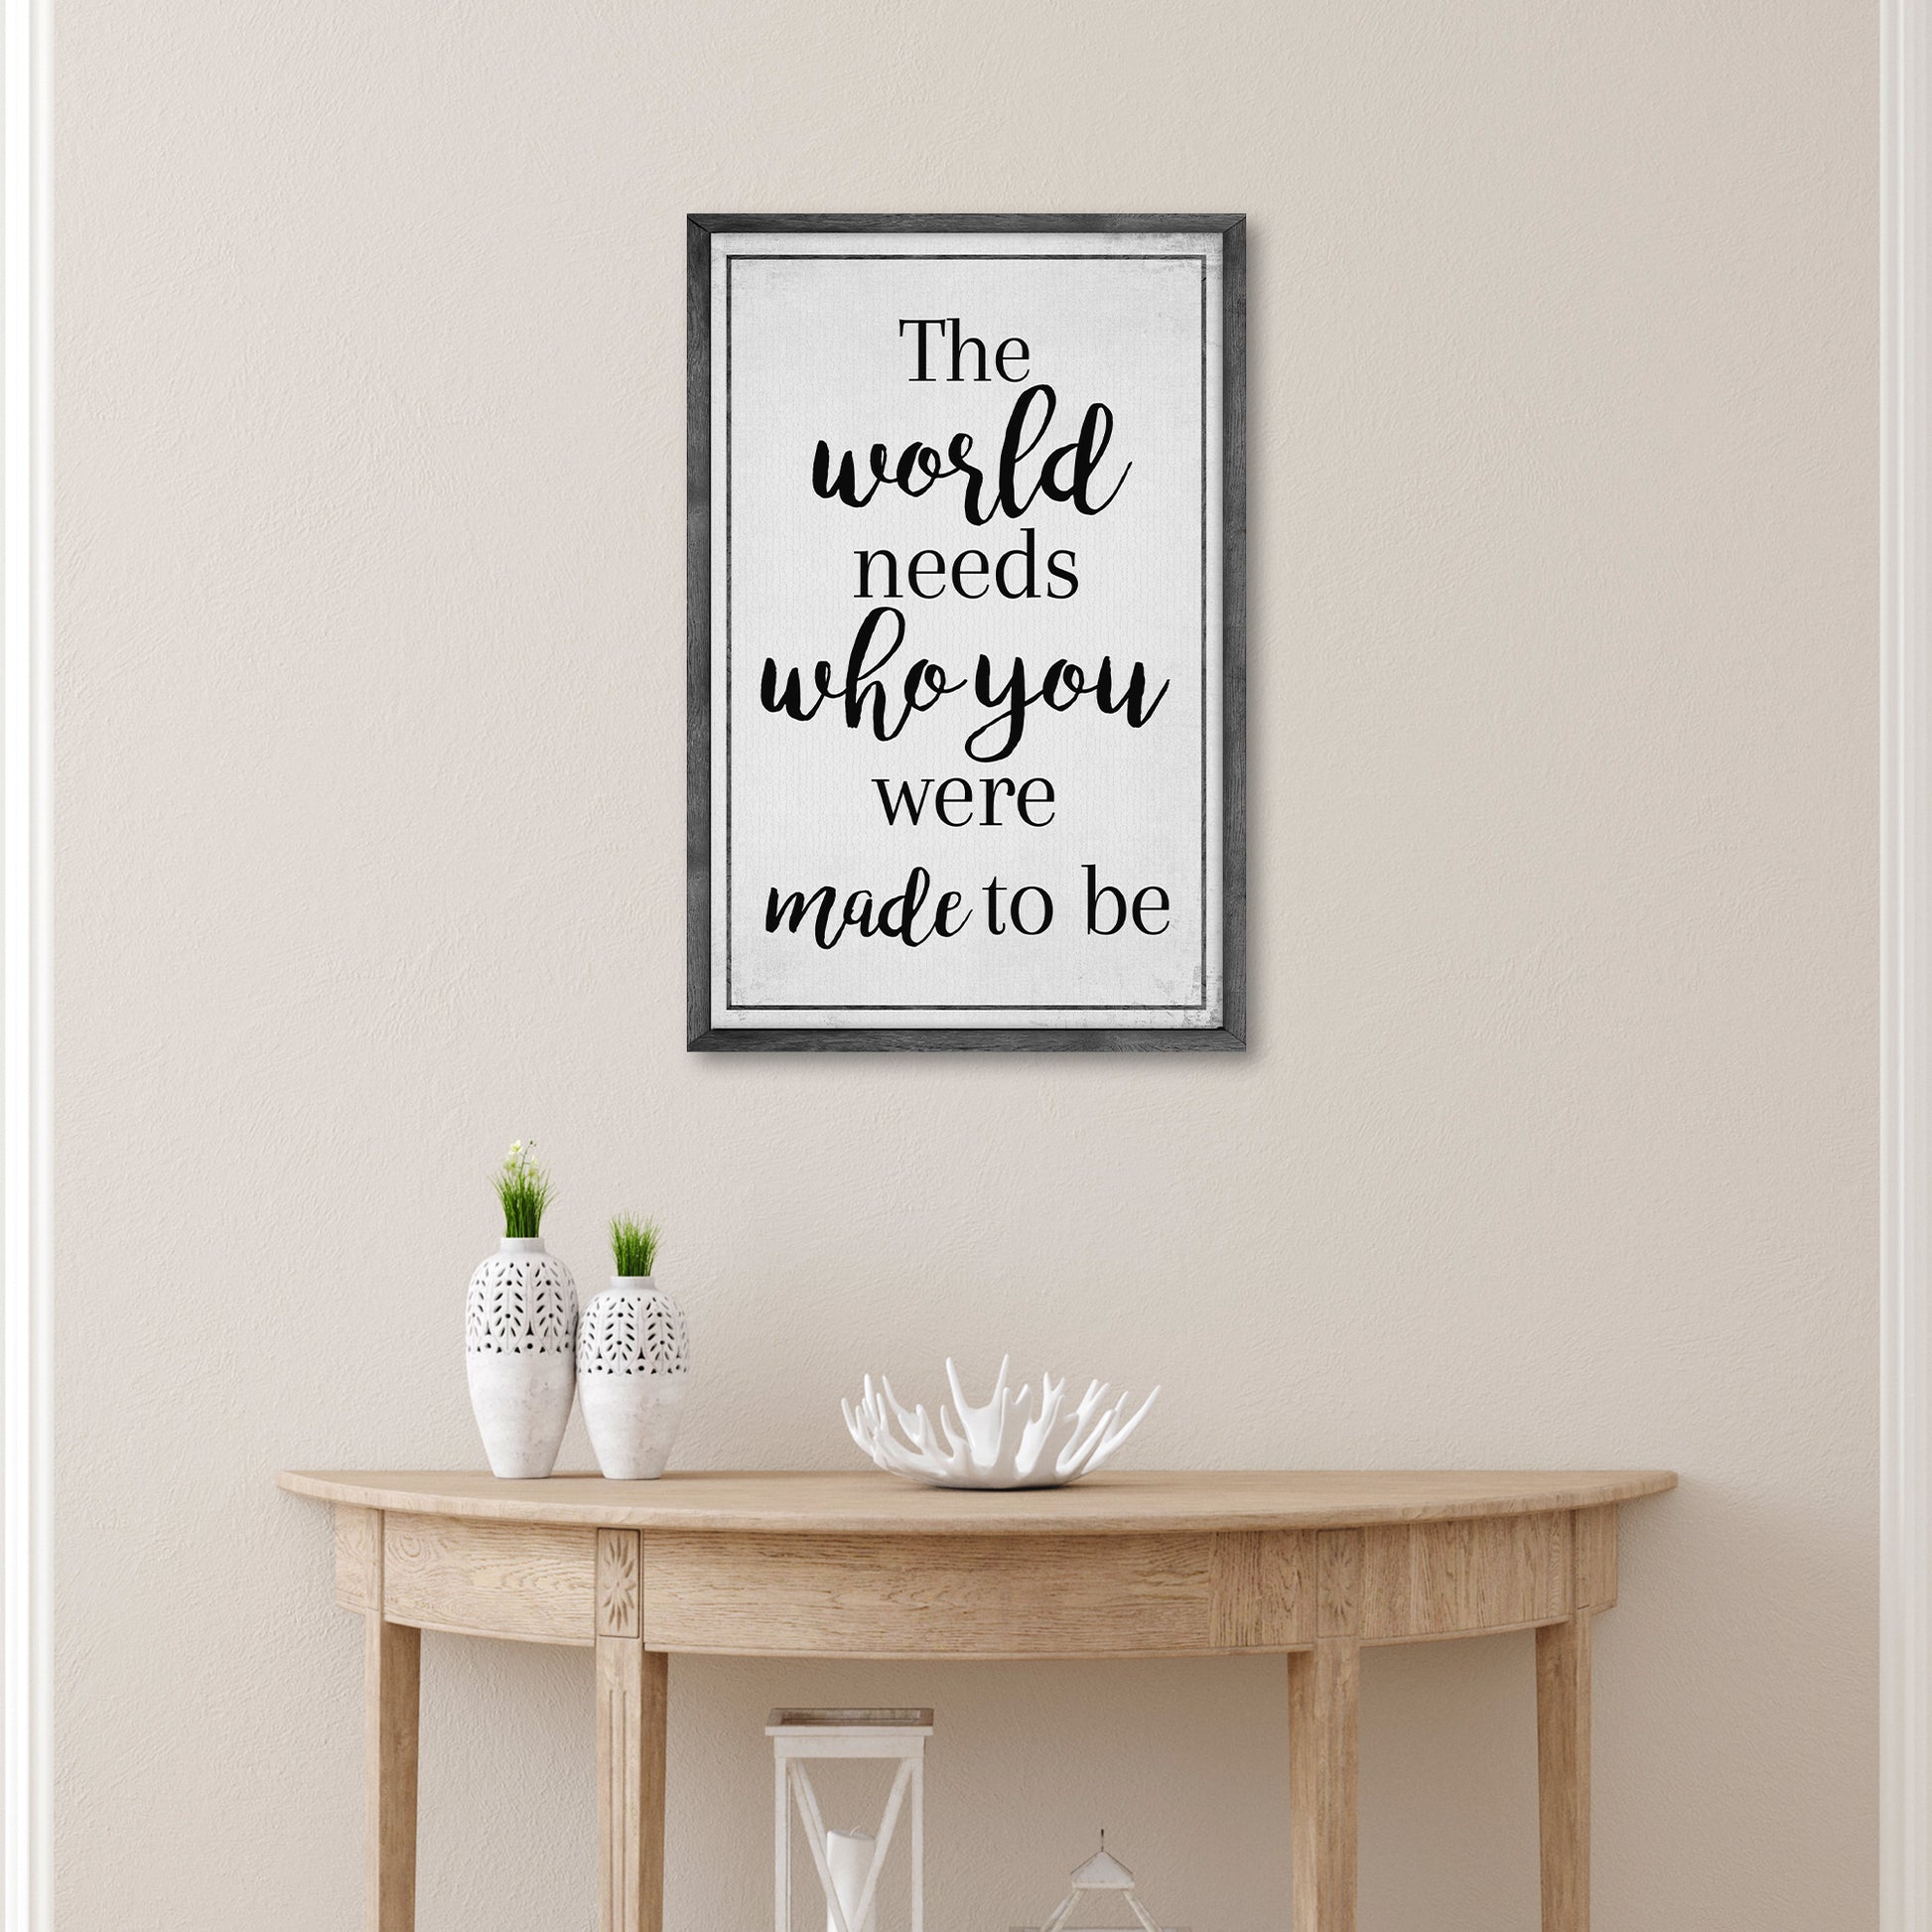 The World Needs Who You Were Made To Be Sign III - Image by Tailored Canvases